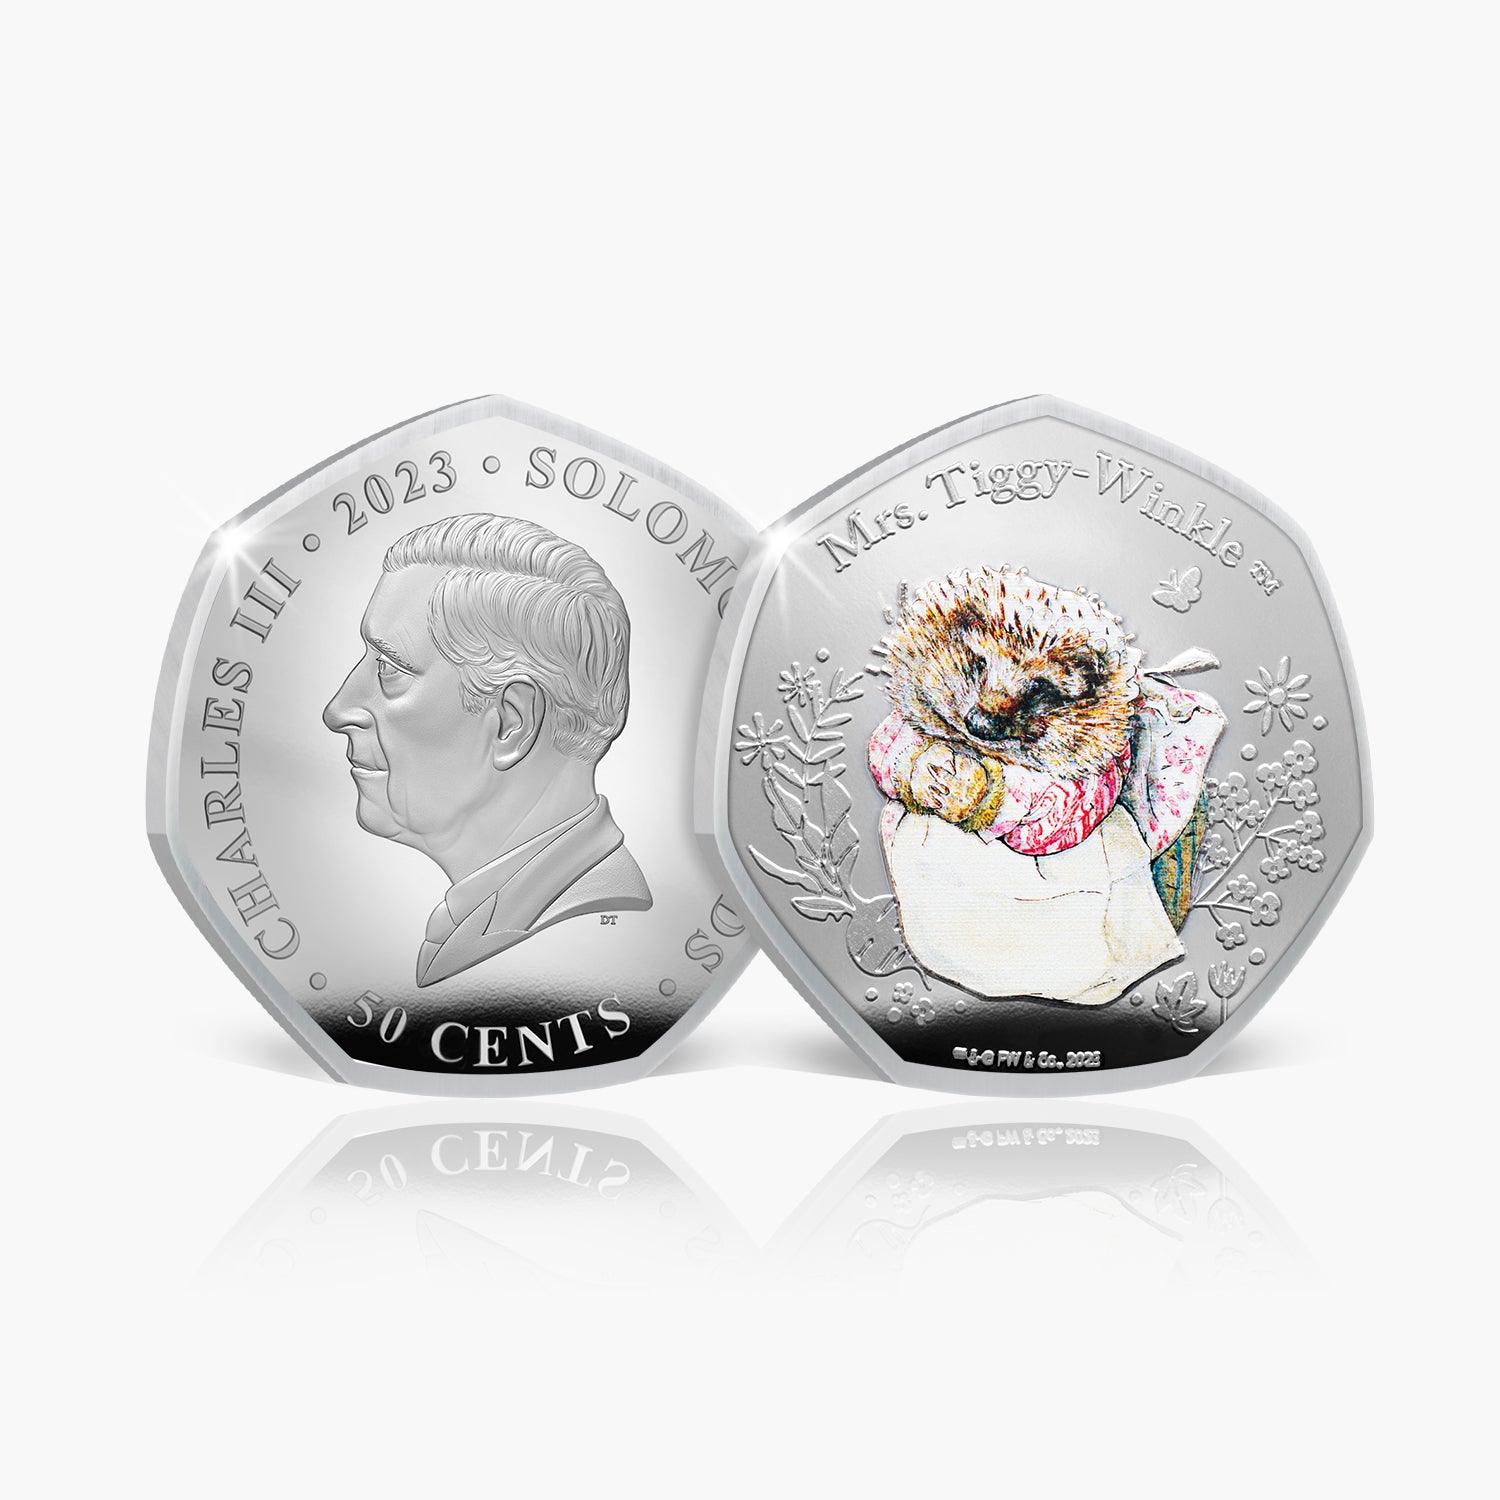 The World of Peter Rabbit 2023 Coin Collection - Mrs Tiggy -Winkle Coin